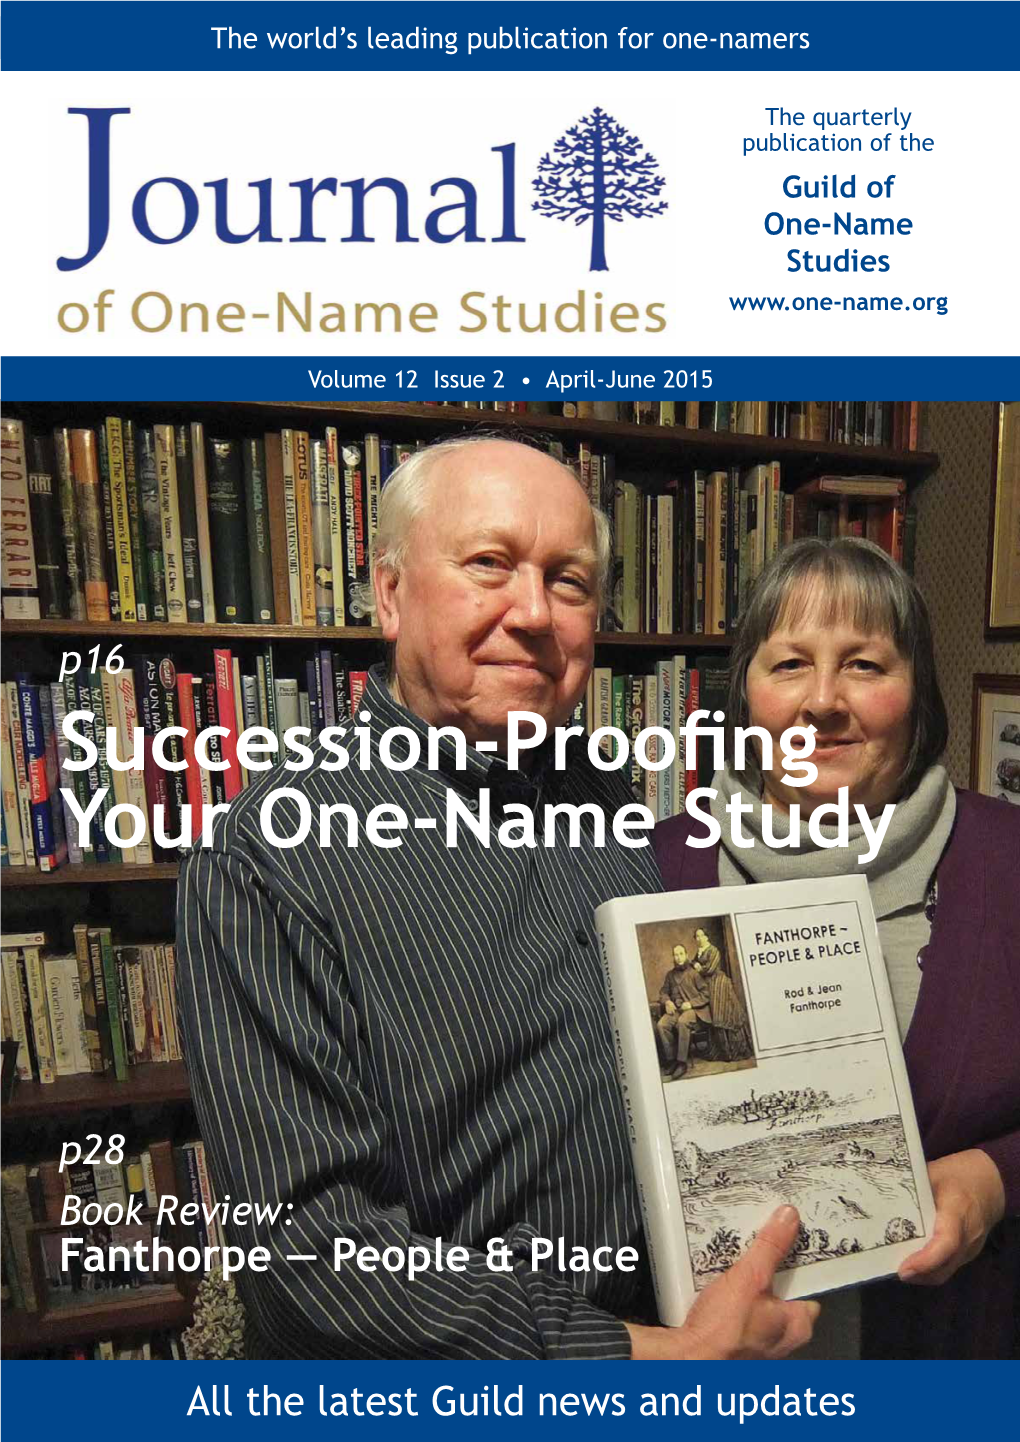 Succession-Proofing Your One-Name Study